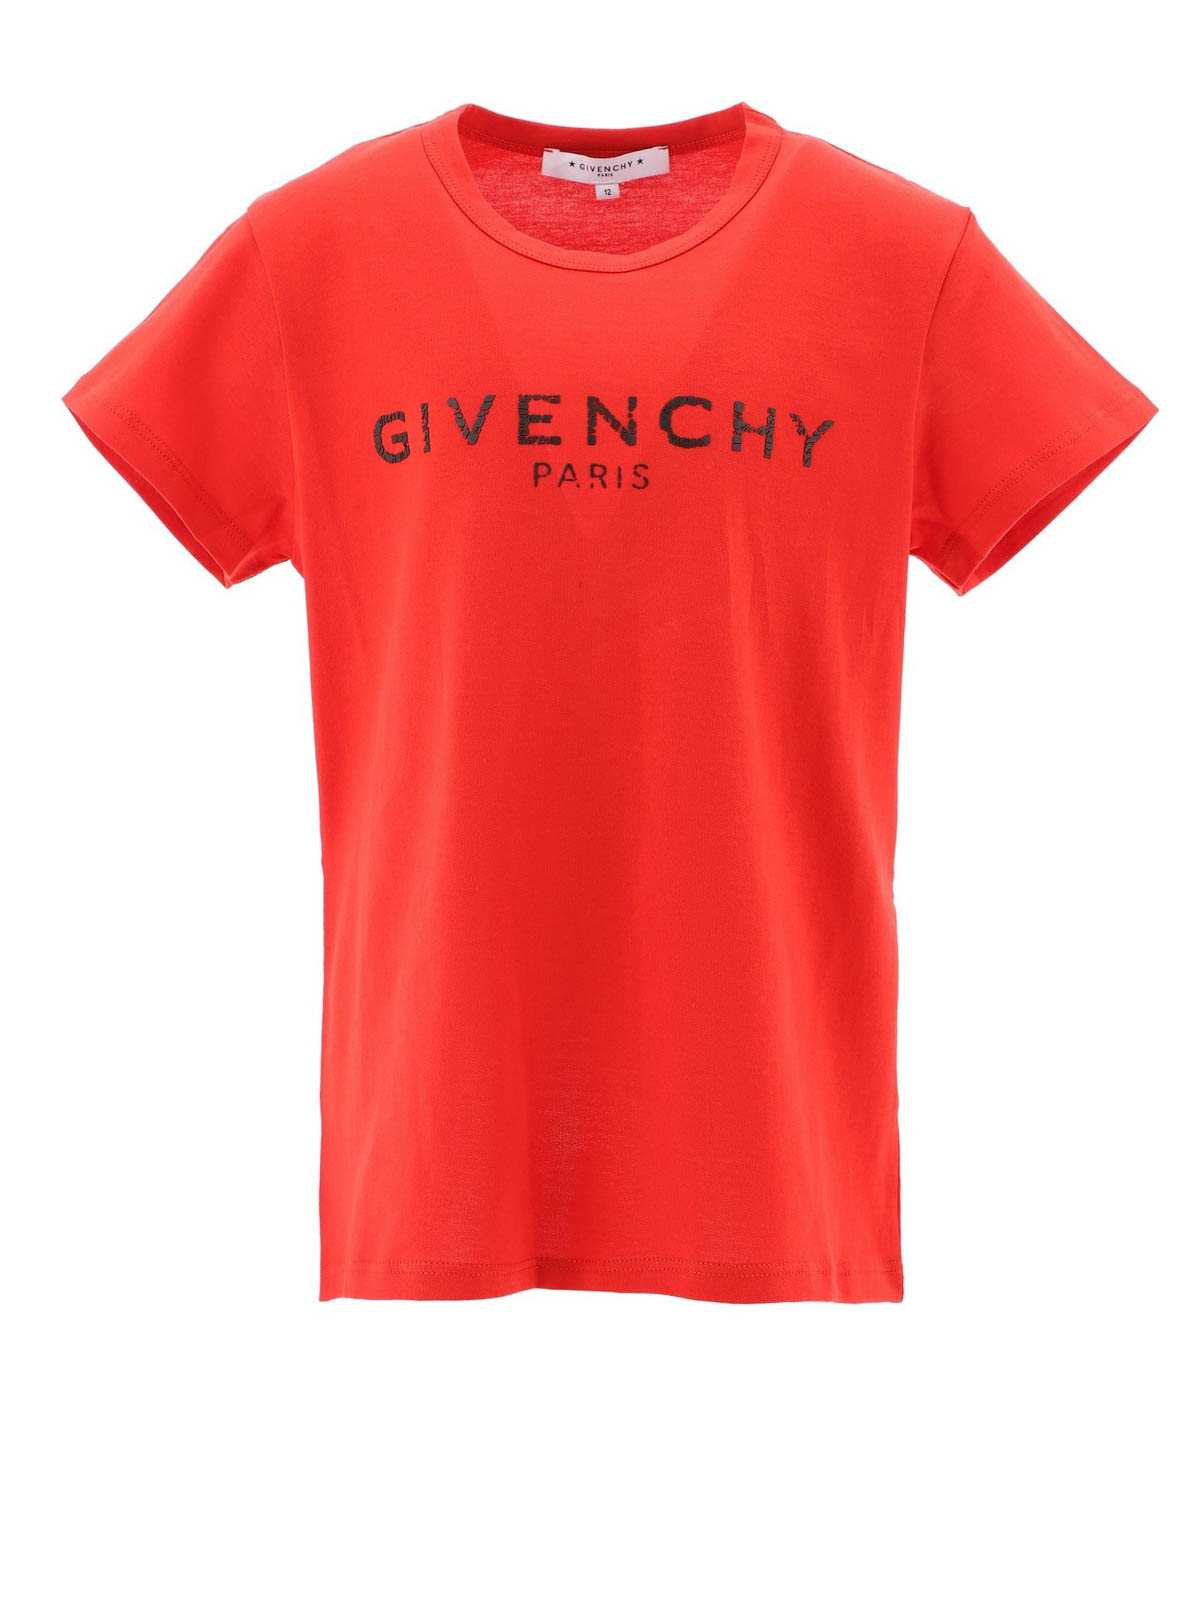 givenchy cracked t shirt